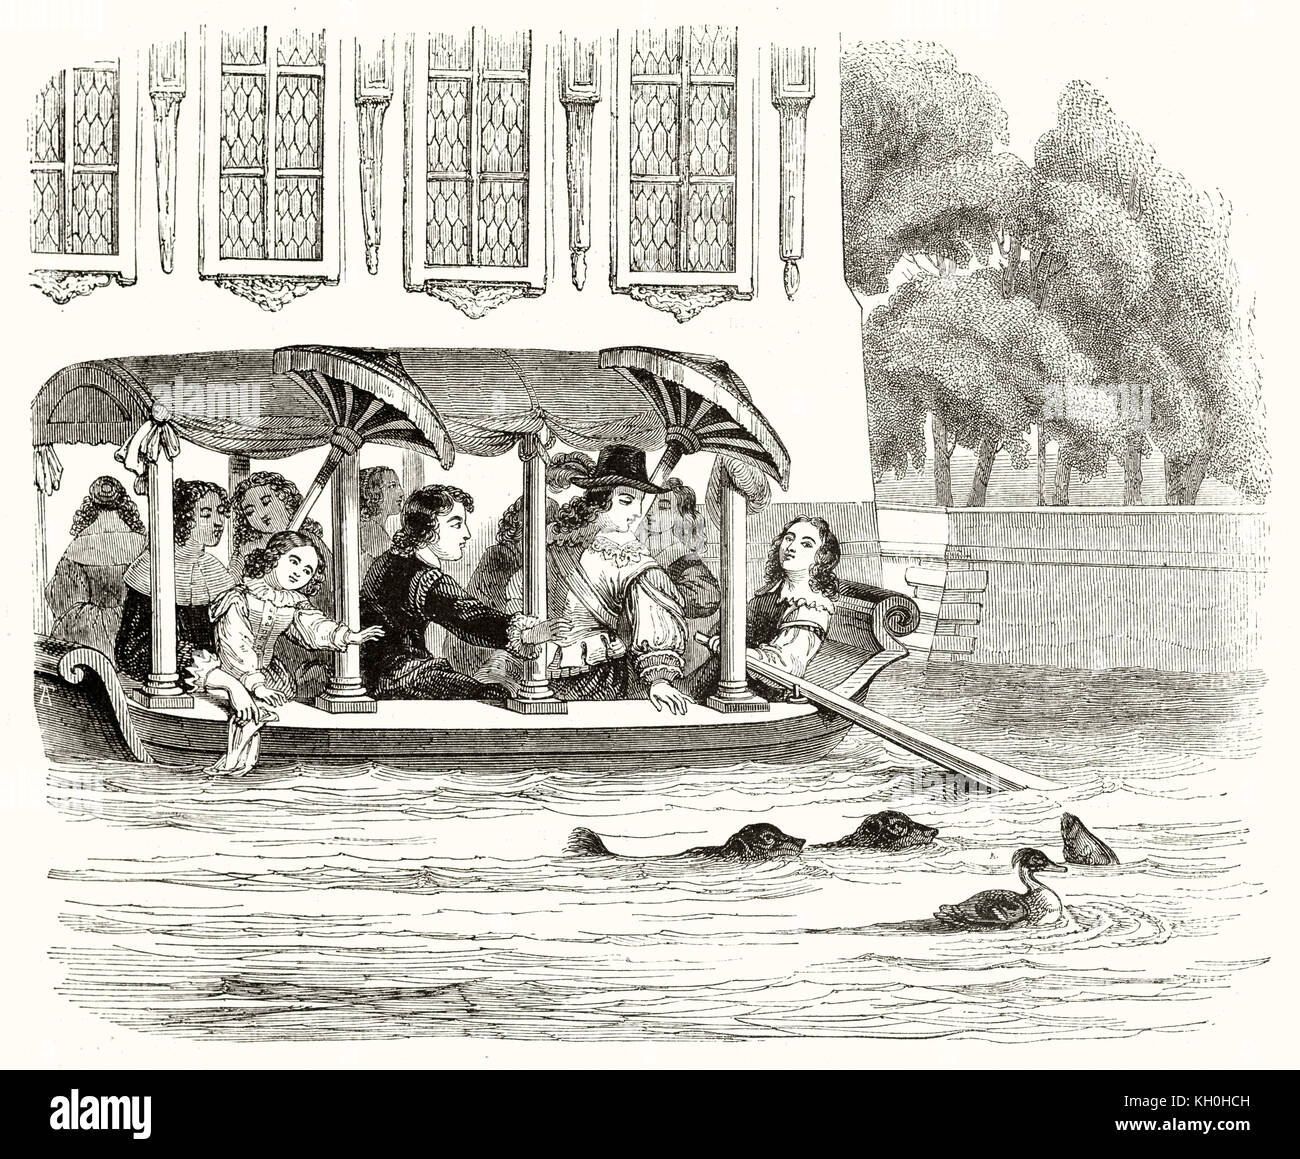 Old illustration depicting Louis XIV as a child having fun on a boat. By unidentified author, publ. on Magasin Pittoresque, Paris, 1847 Stock Photo